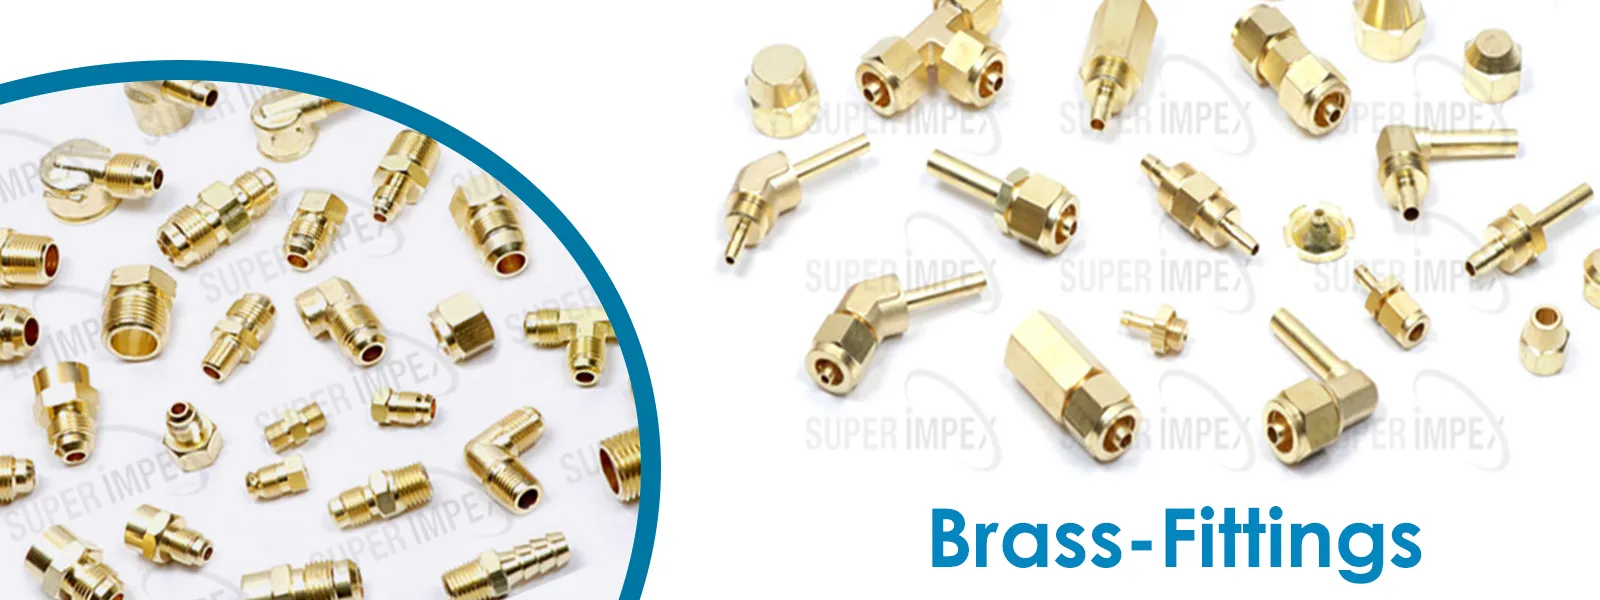 Brass inserts fittings supplier